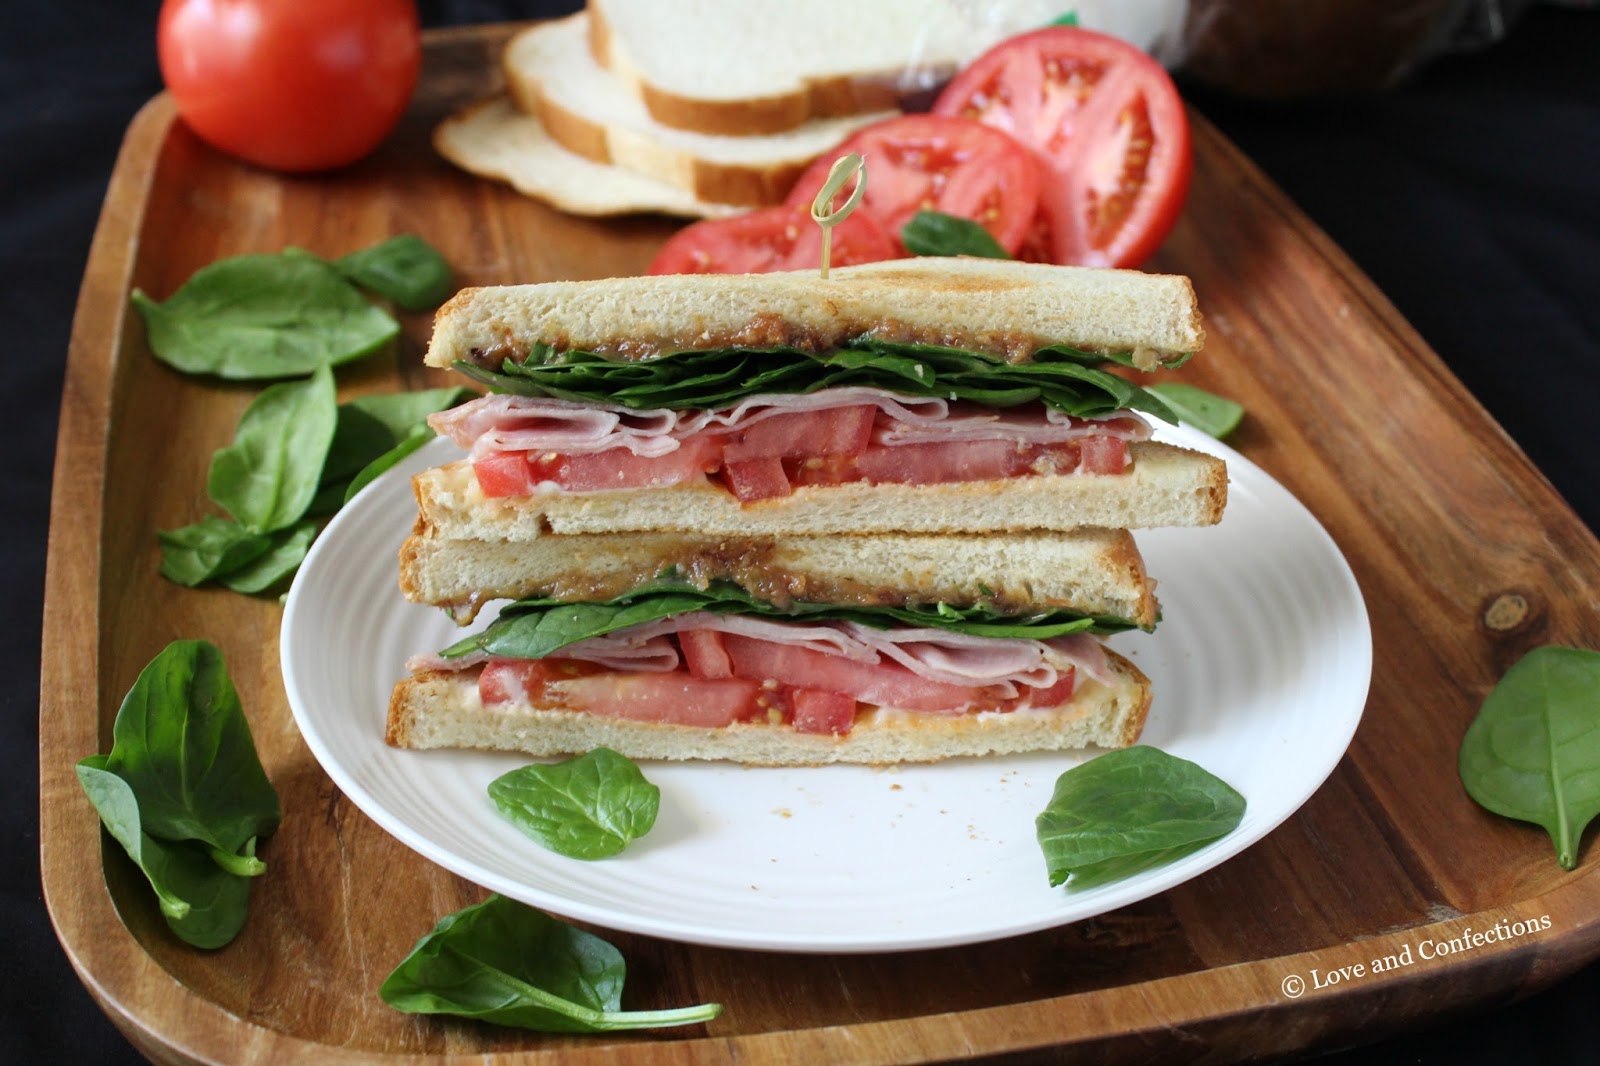 Love and Confections: Bacon Jam &amp; Ham BLT #SandwichWithTheBest